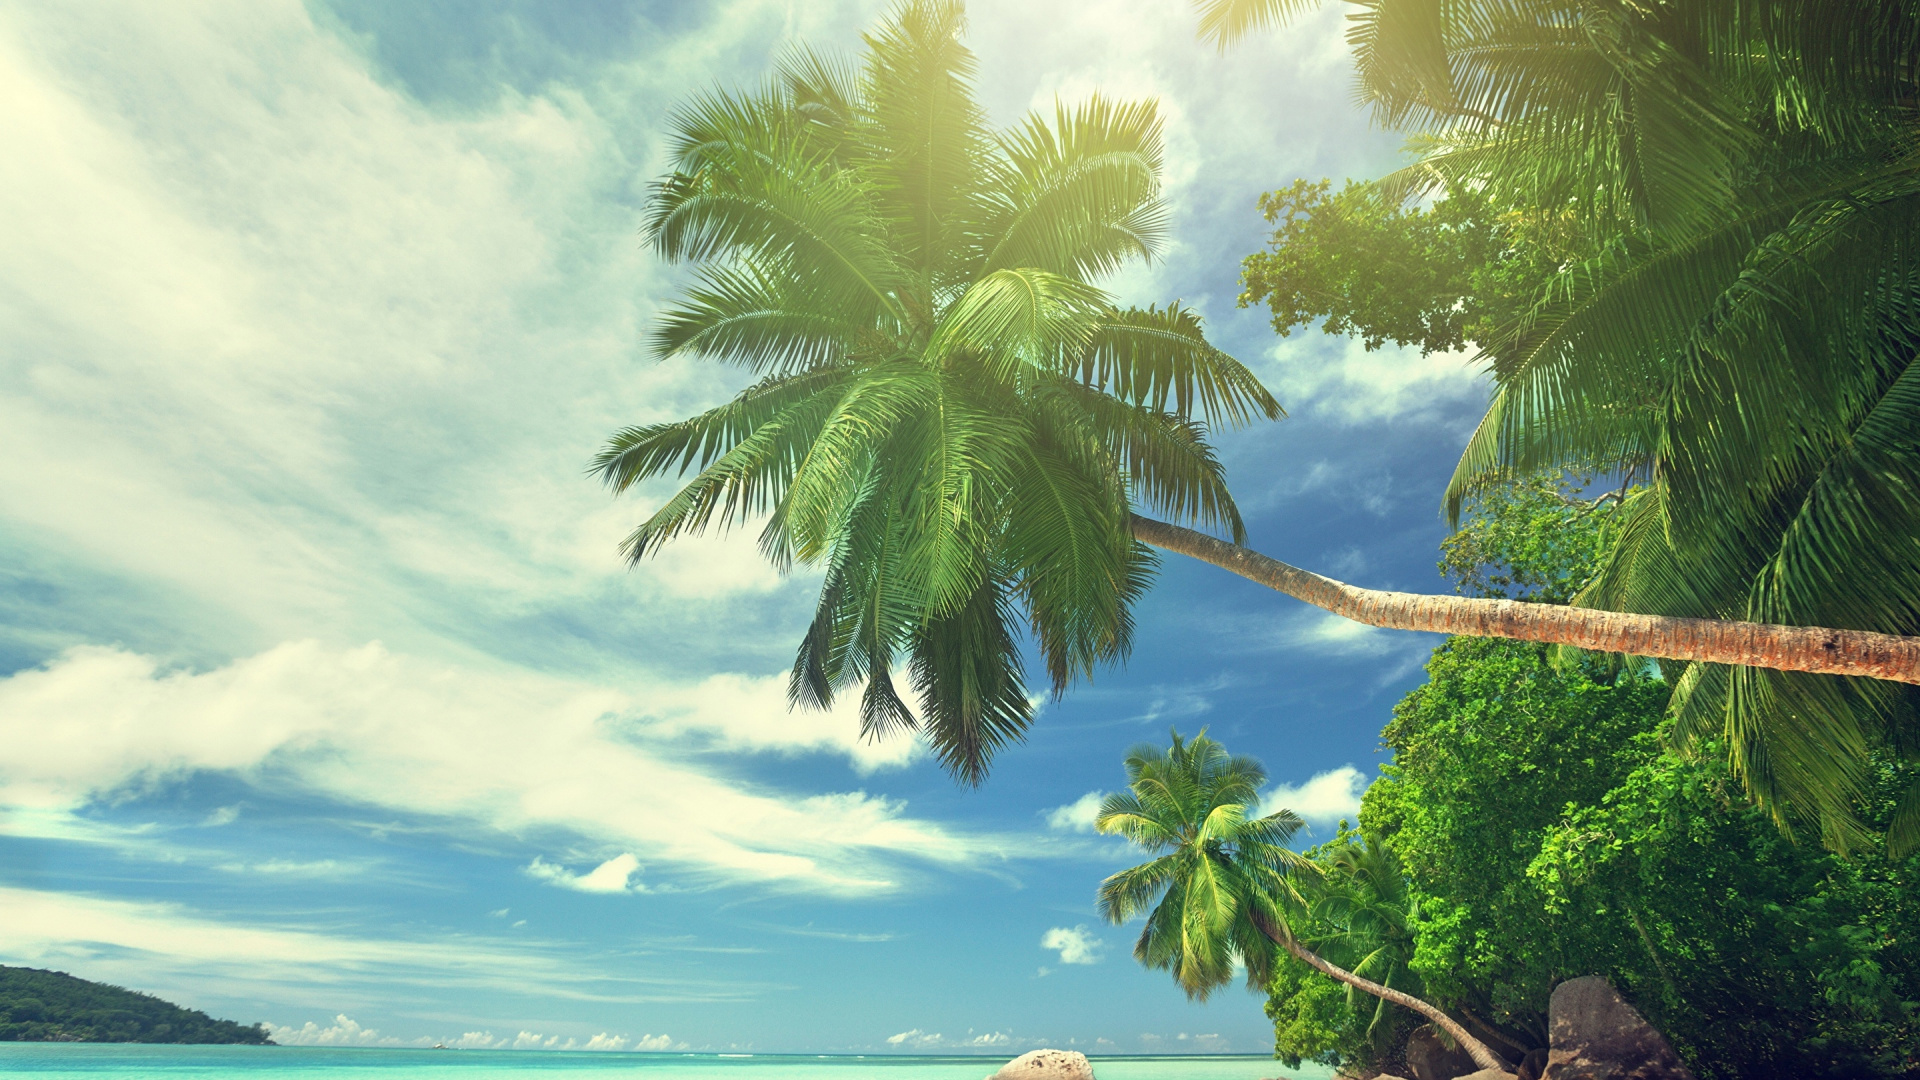 Coconut Tree Near Sea Shore During Daytime. Wallpaper in 1920x1080 Resolution